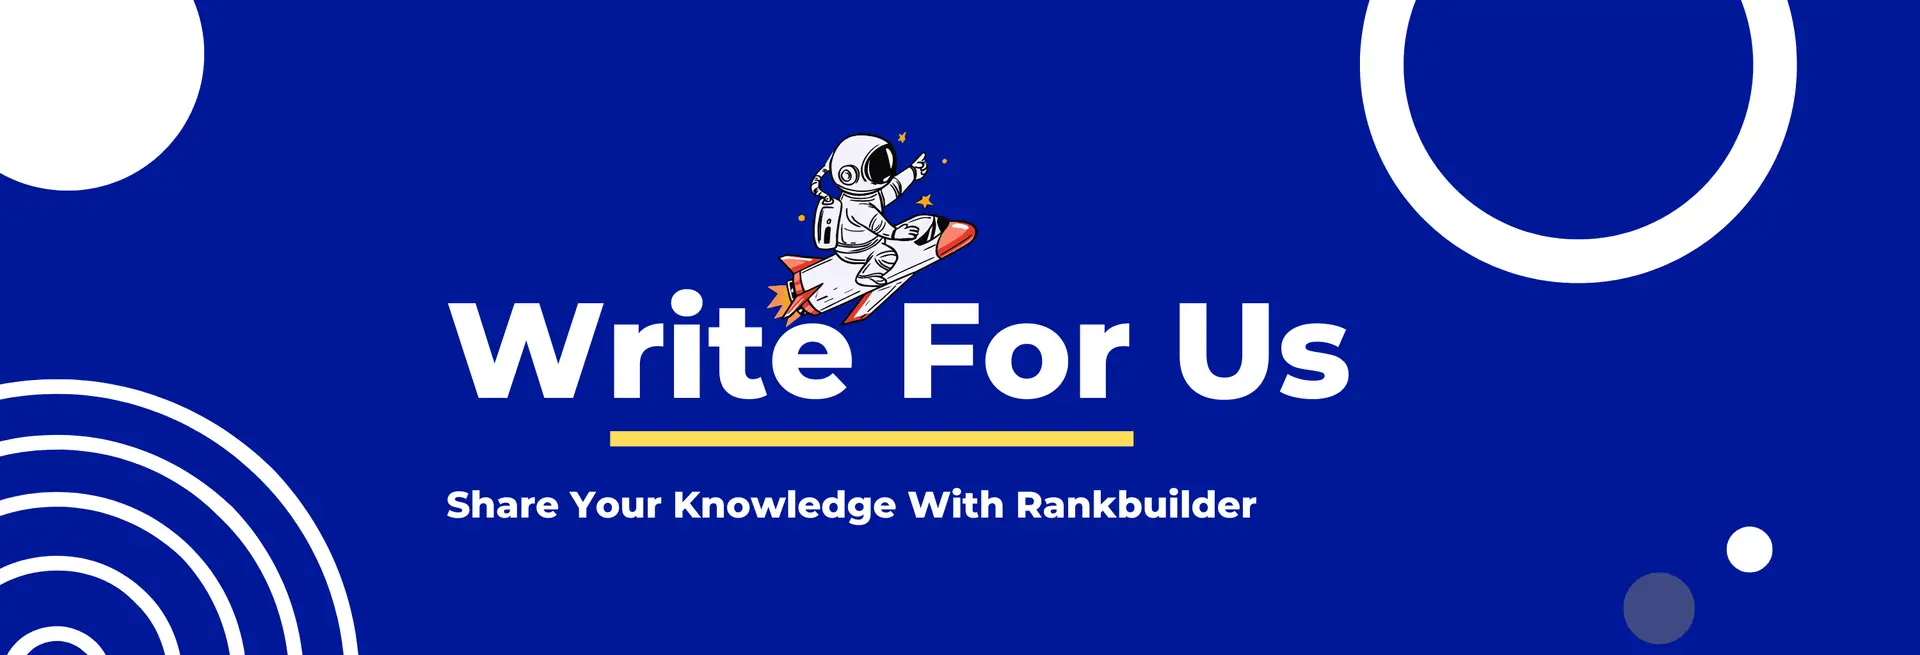 Write for us - share your knowledge with rankbuilder. A platform for contributing and expanding your expertise. Join us today!